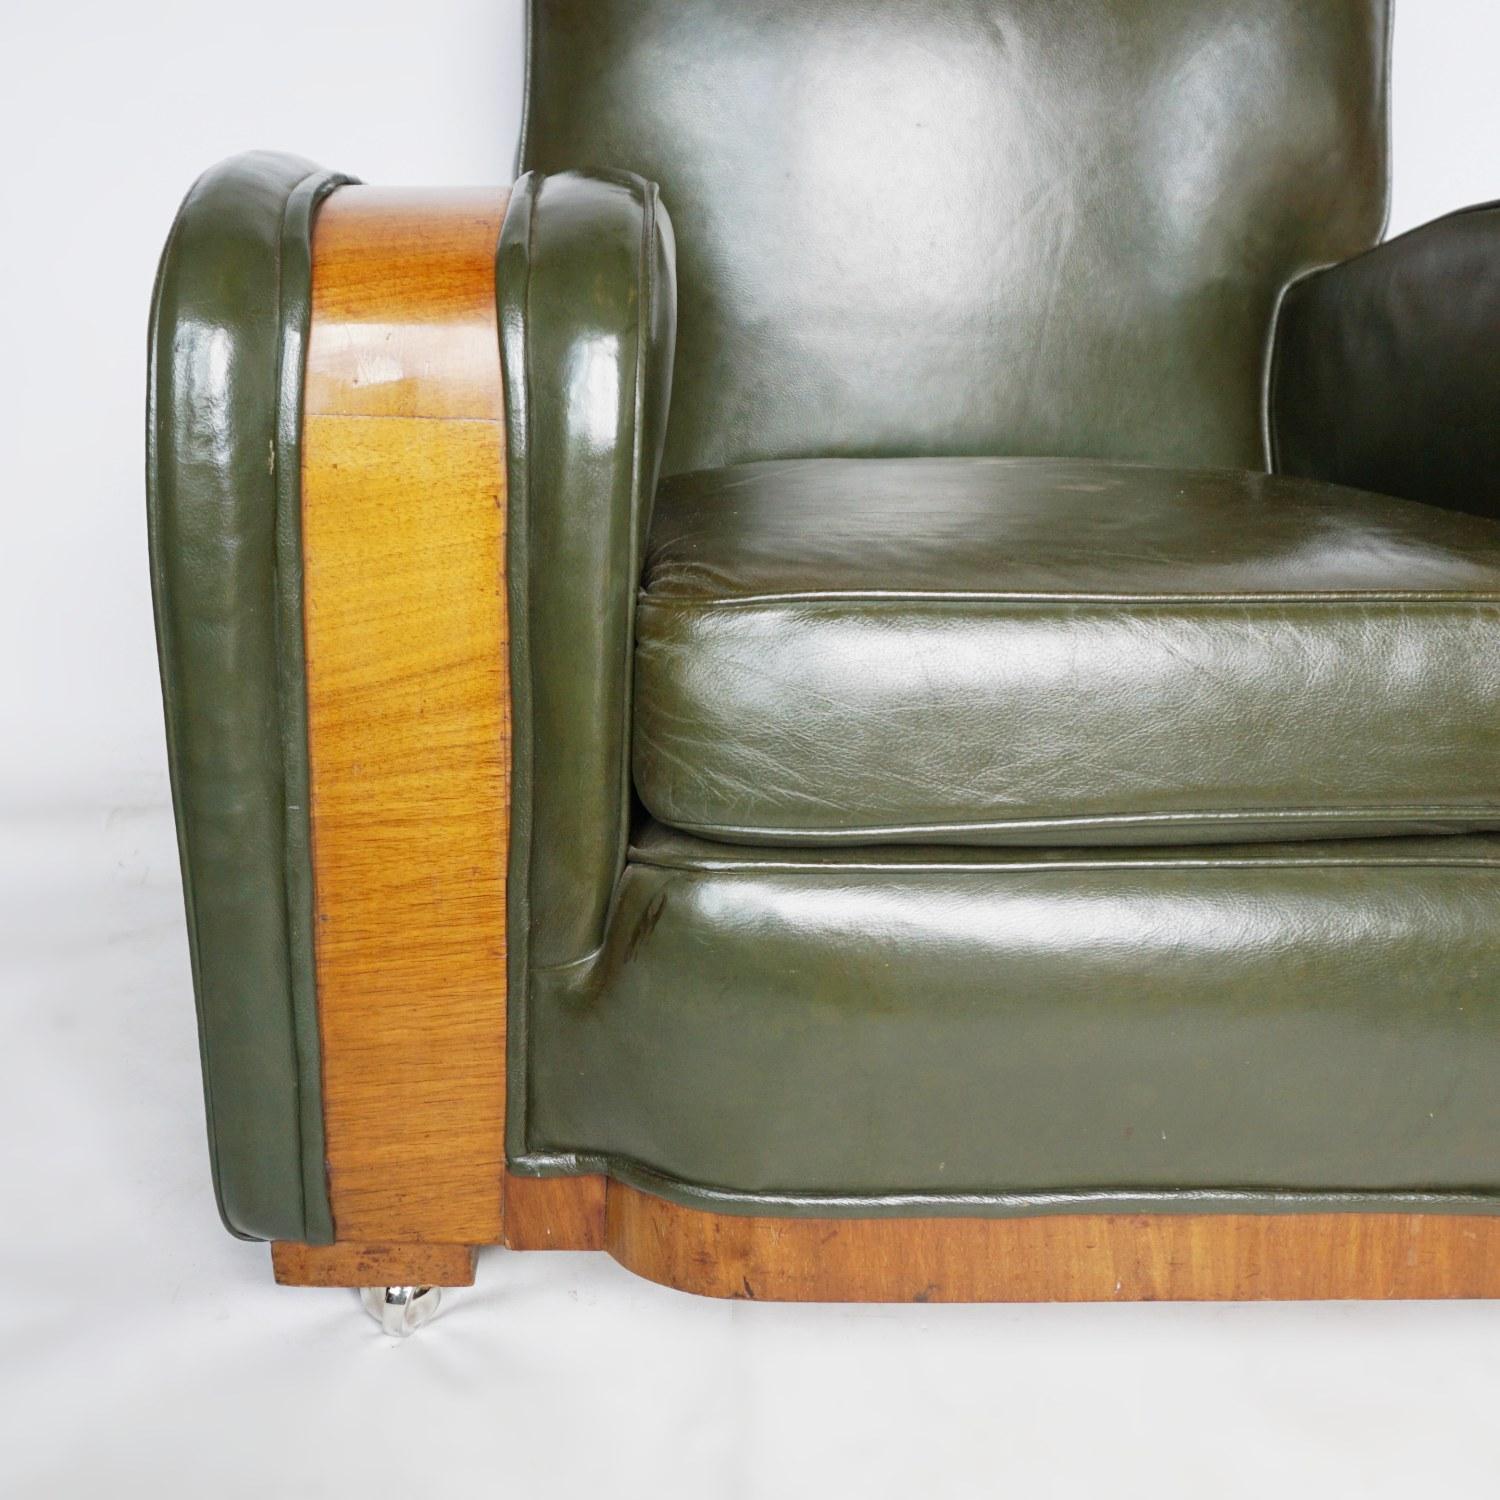 Pair of Art Deco Tank Chairs Attributed to Heal's of London 1